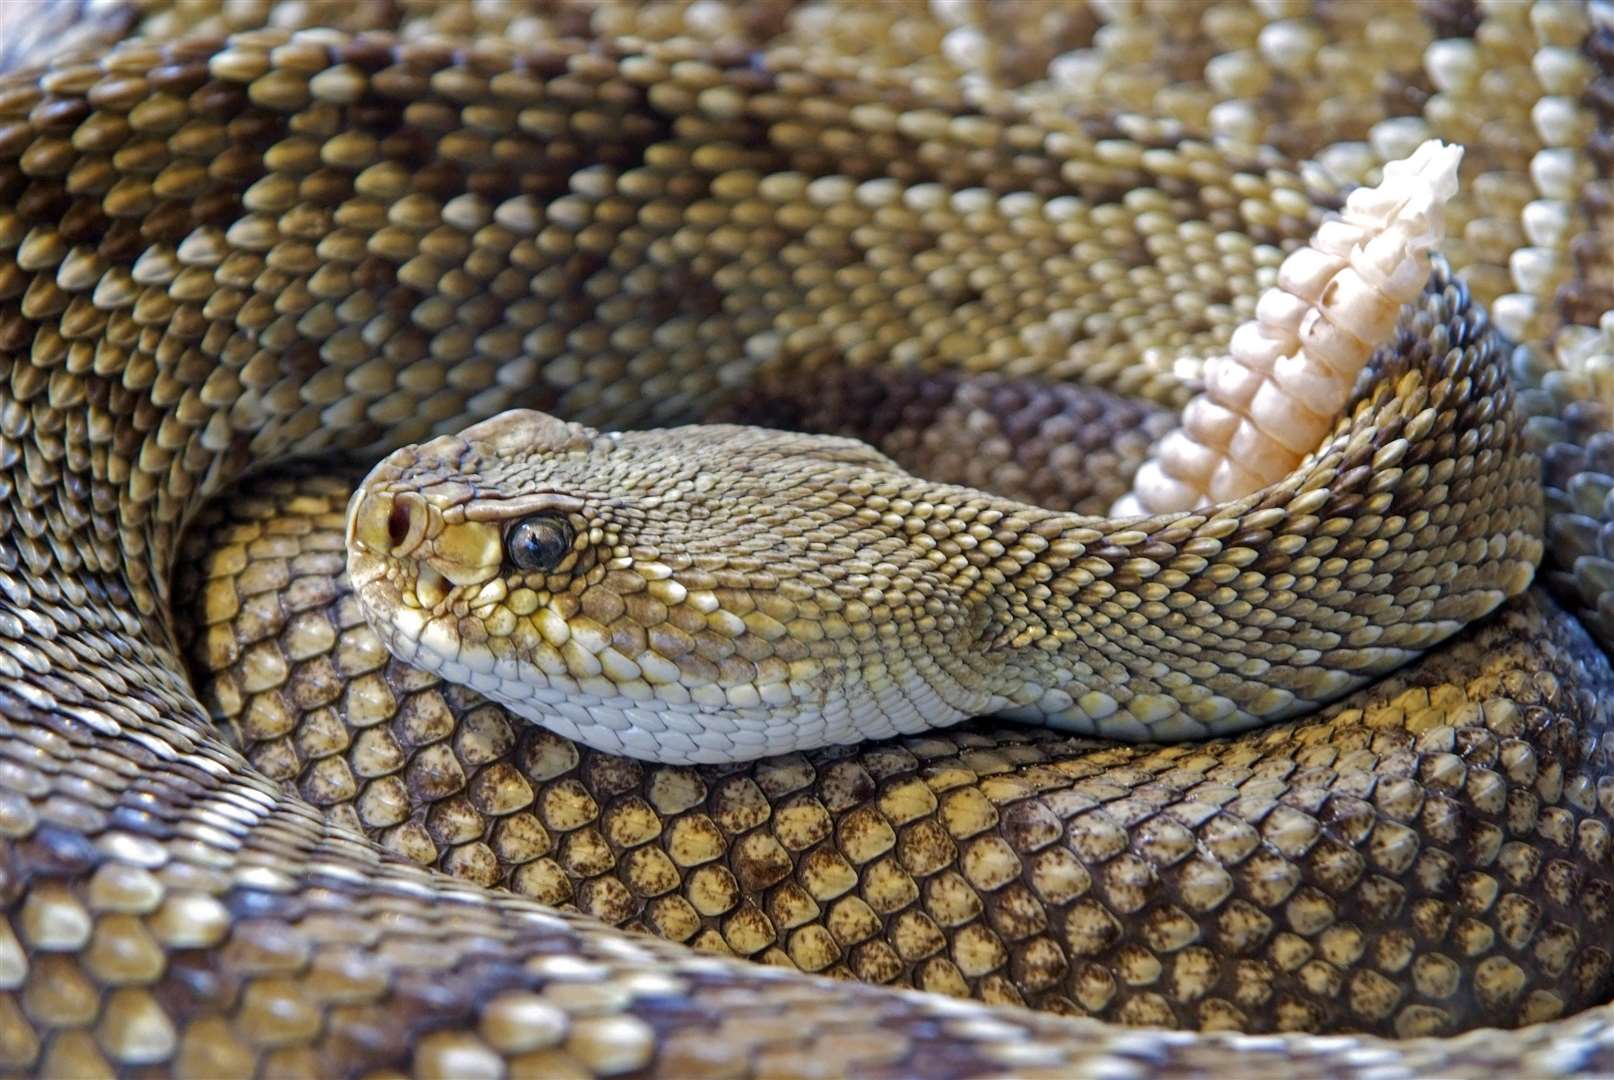 Three rattlesnakes are kept in Kent Picture: Born Free, Pixabay (45161990)